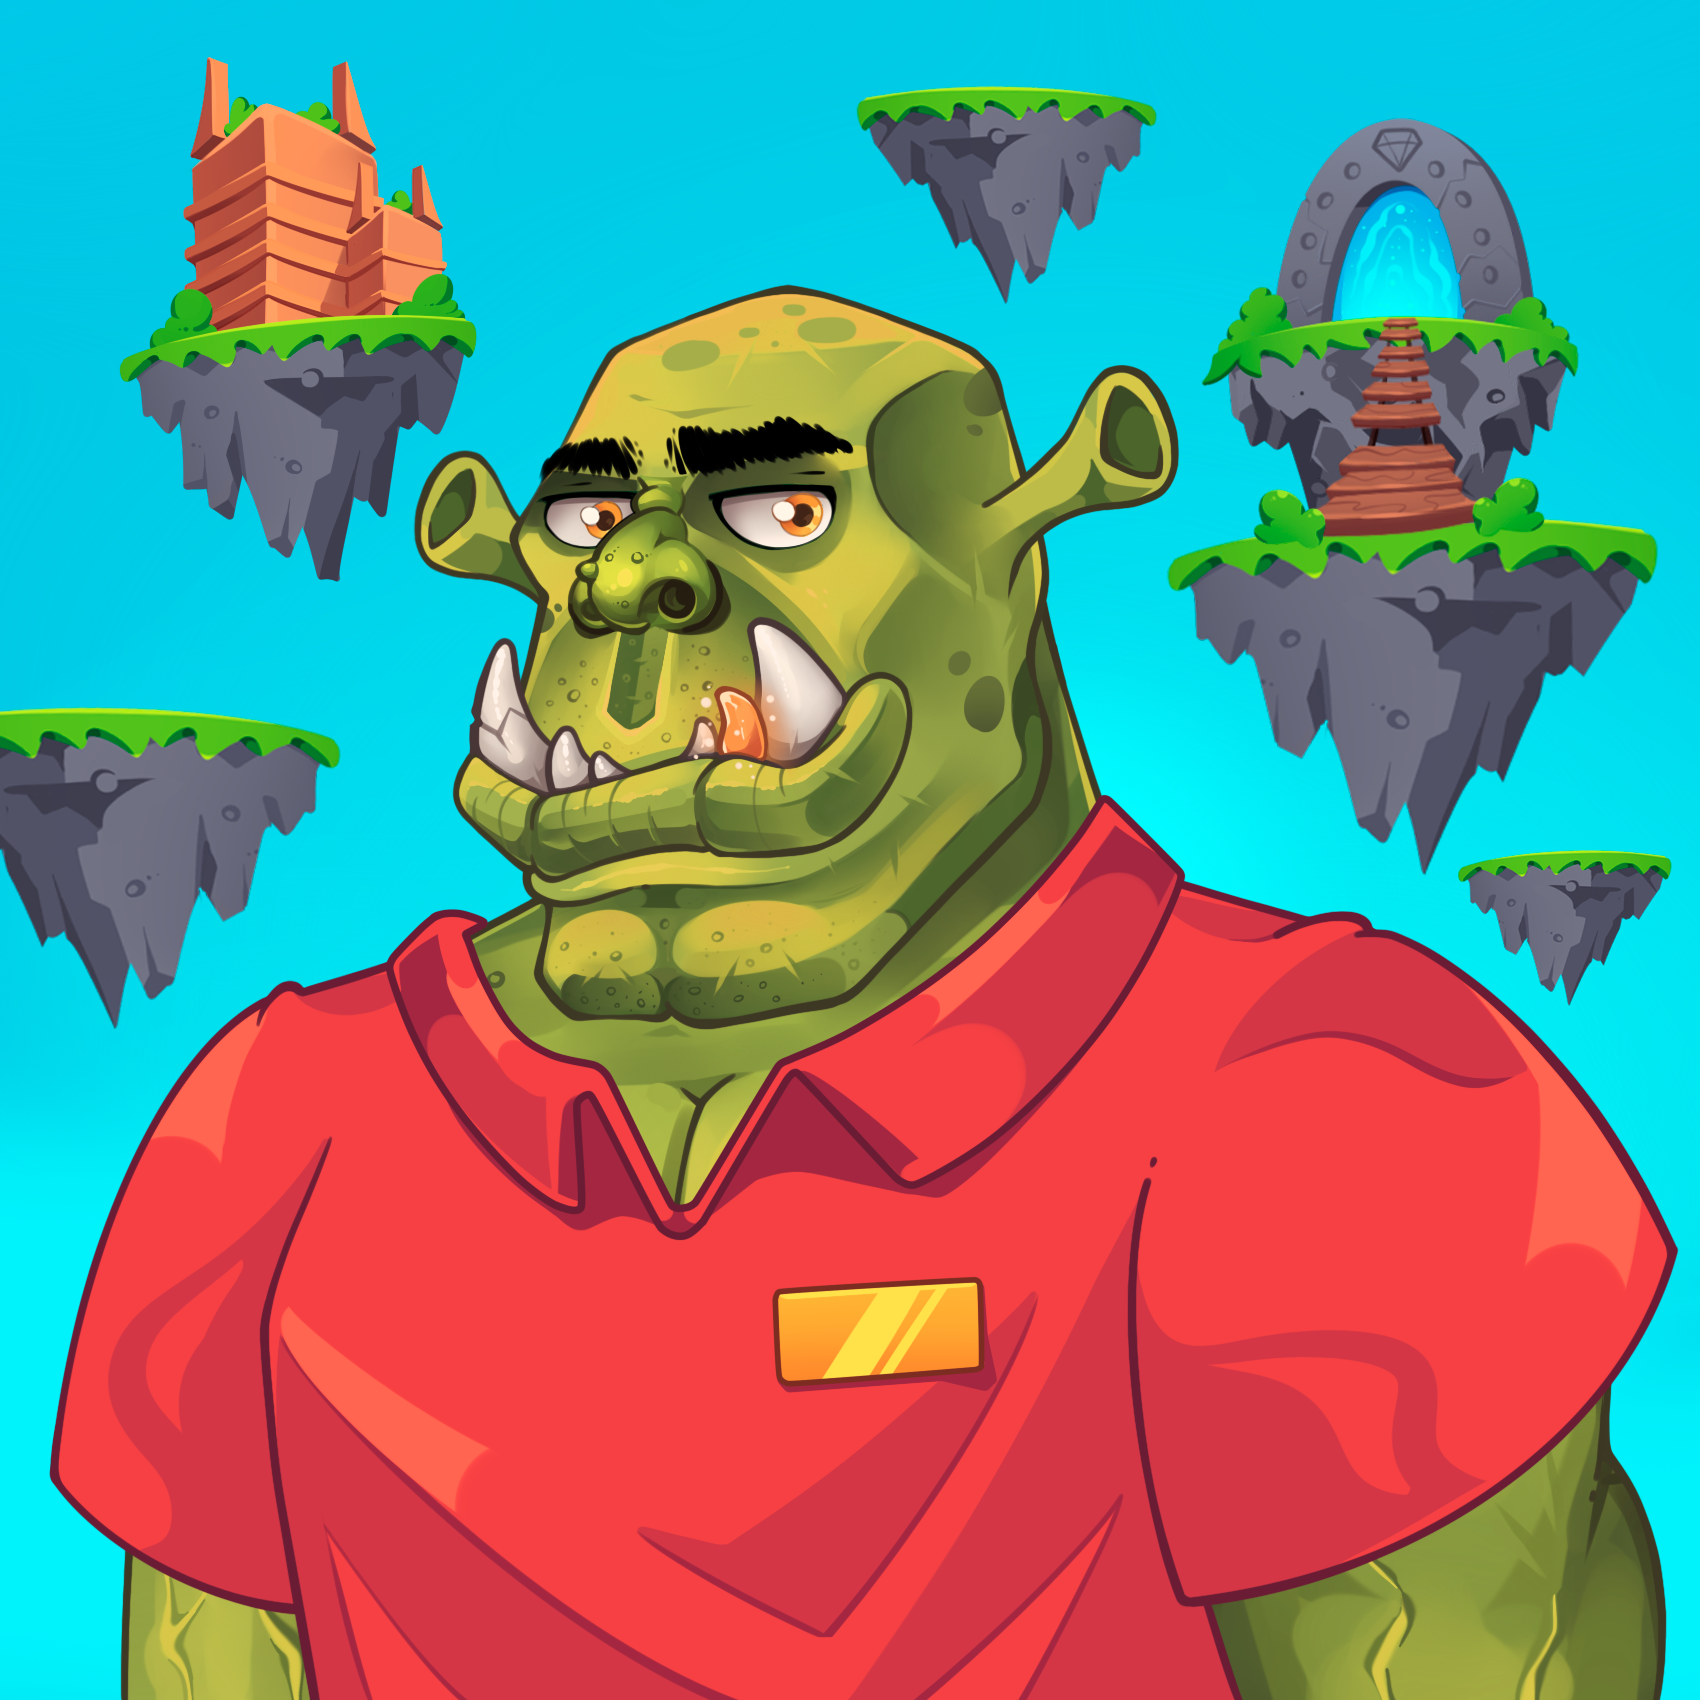 The Orcs #4089